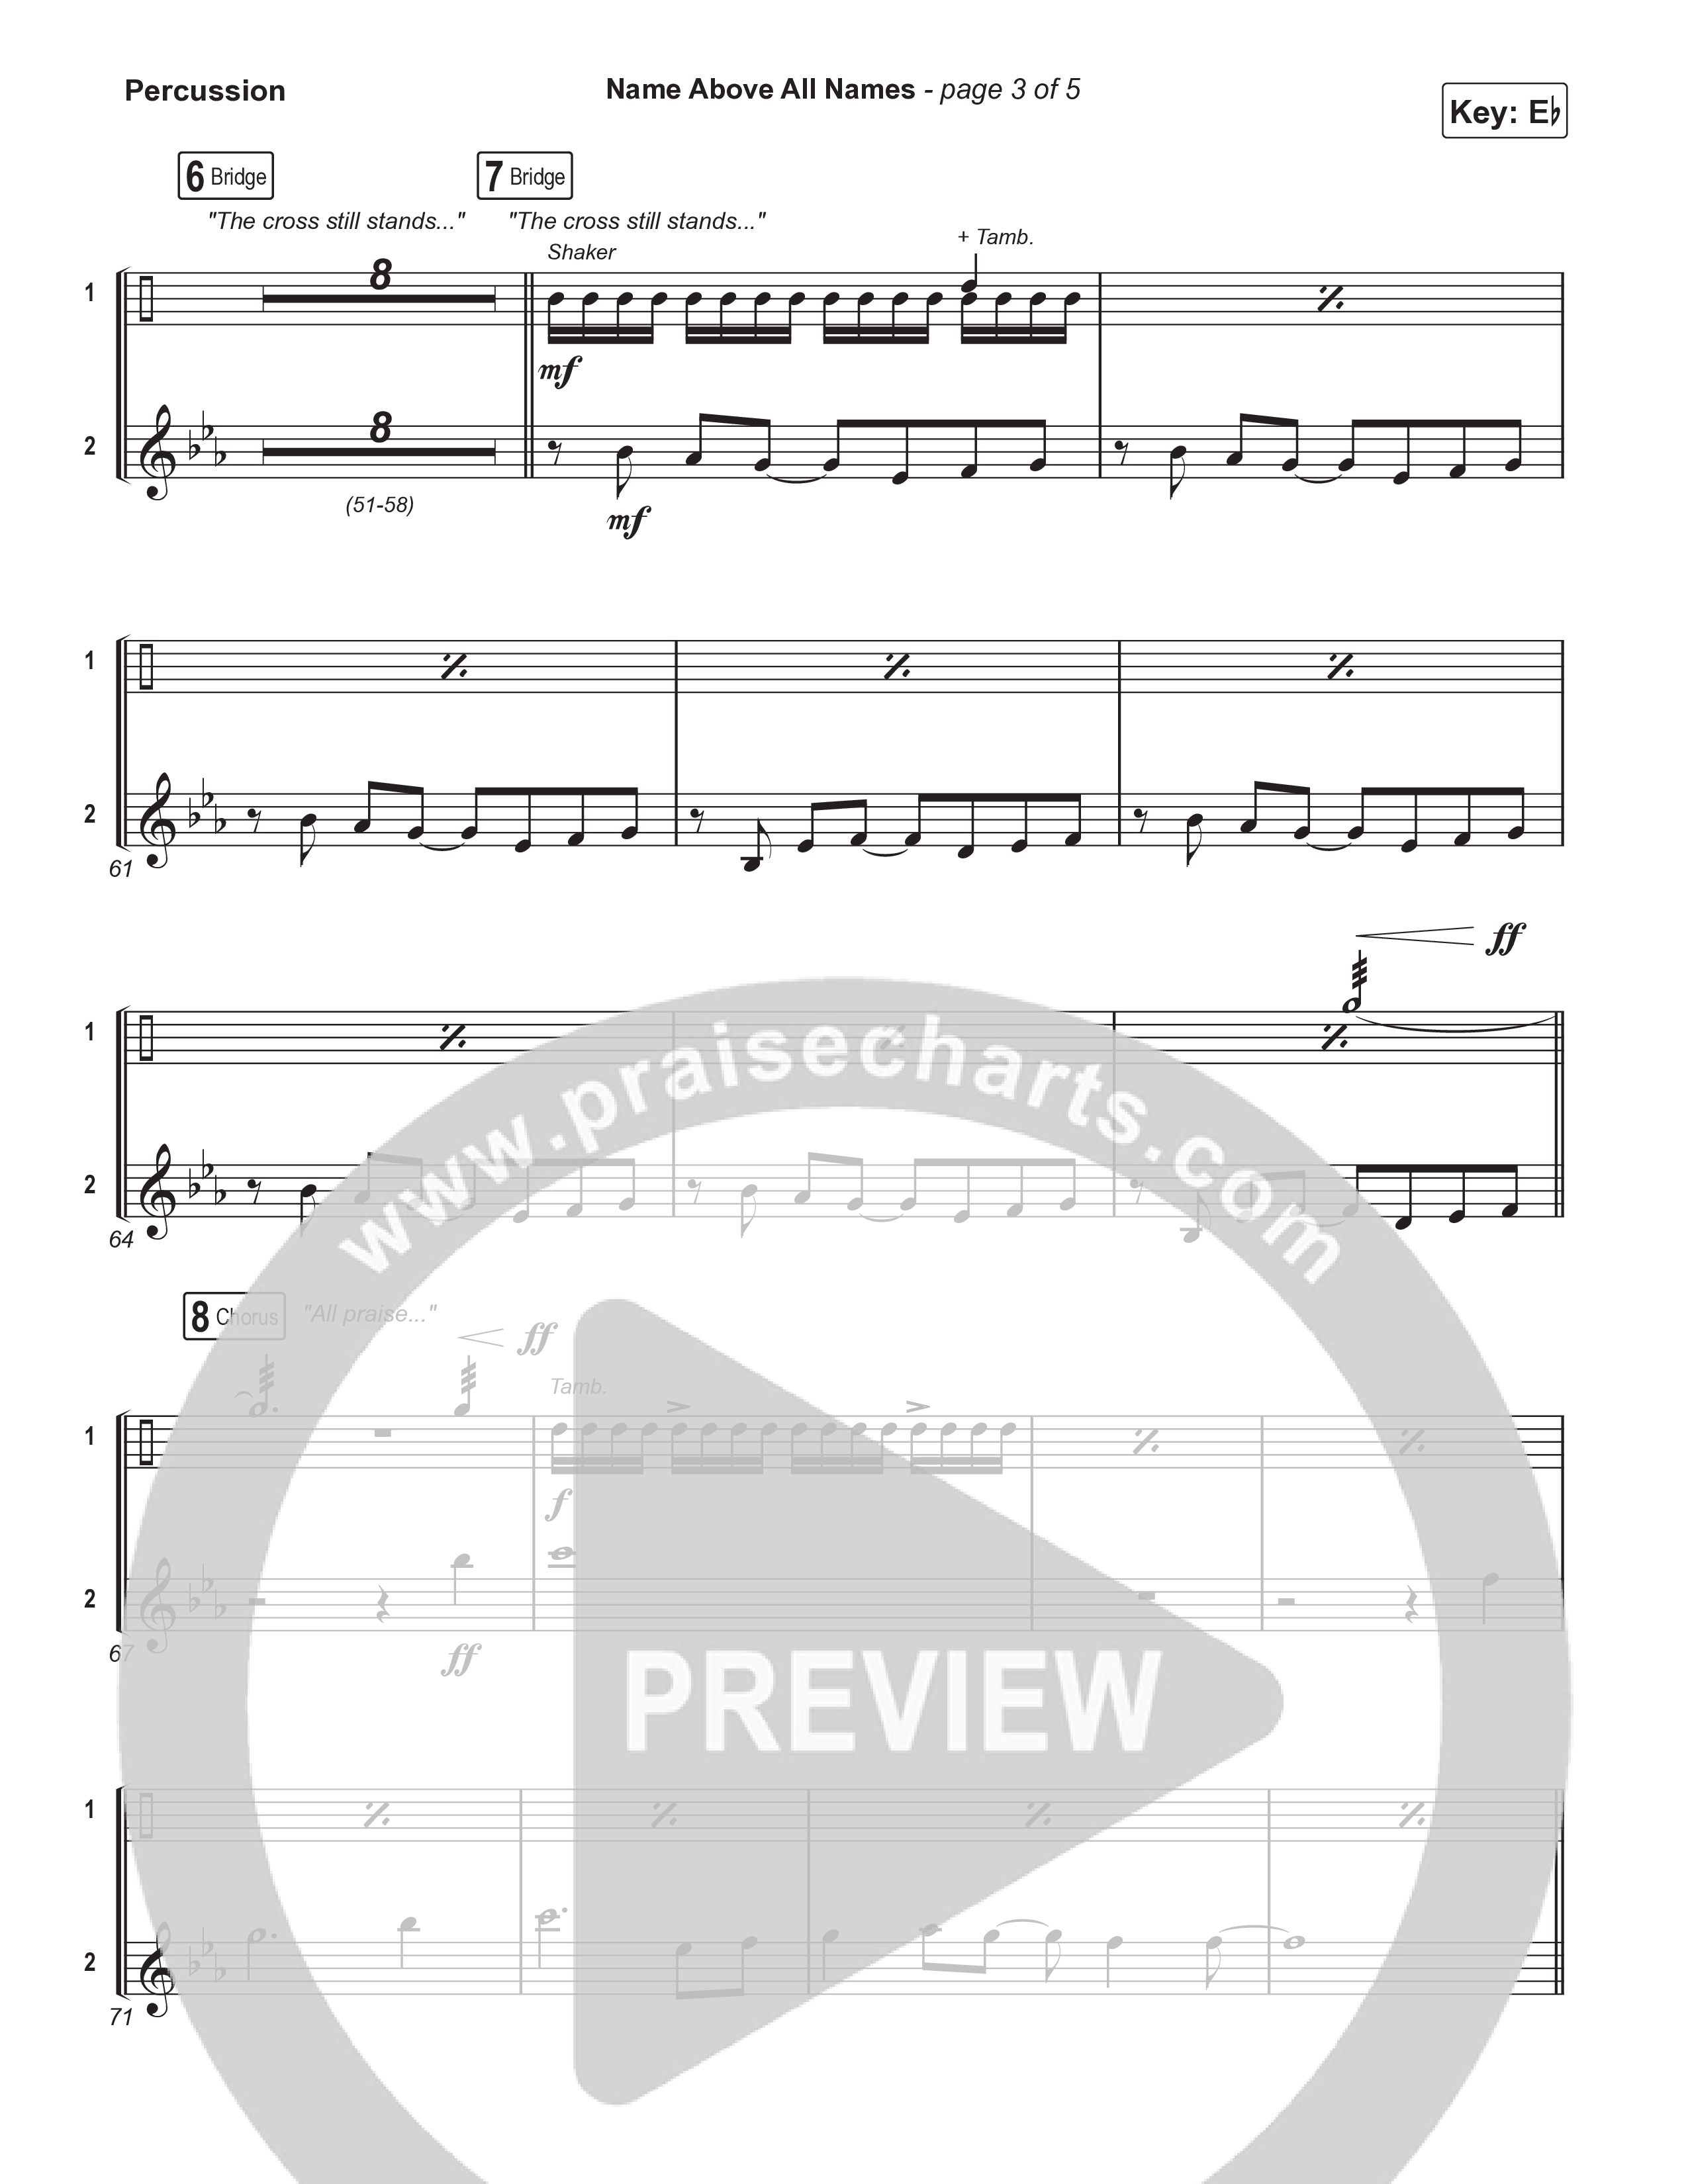 Name Above All Names (Choral Anthem SATB) Percussion (Charity Gayle / Arr. Luke Gambill)